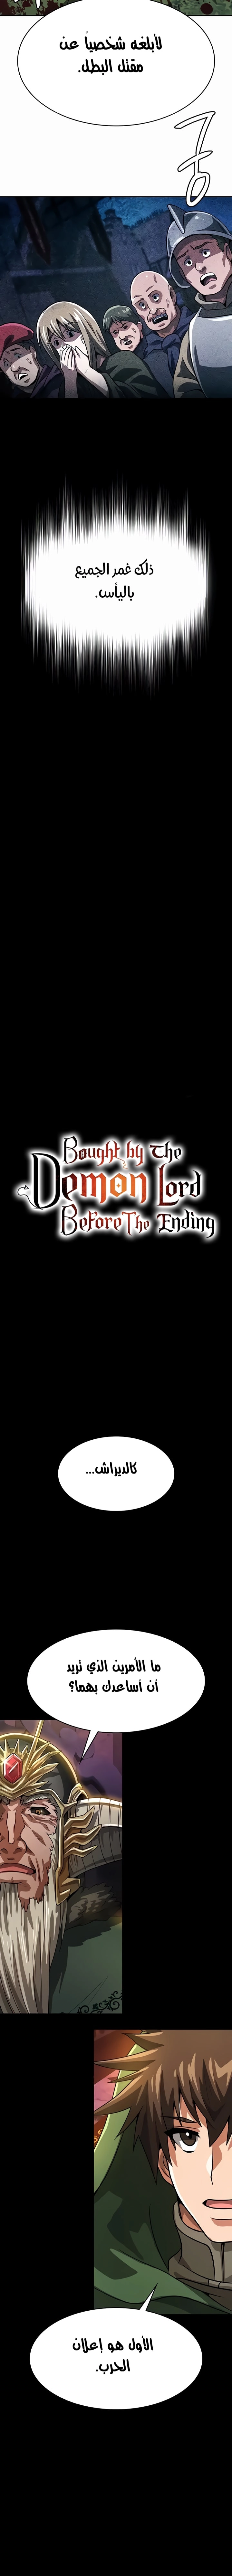 Bought By The Demon Lord Before The Ending - 53 - 659d1c6e0440e.webp